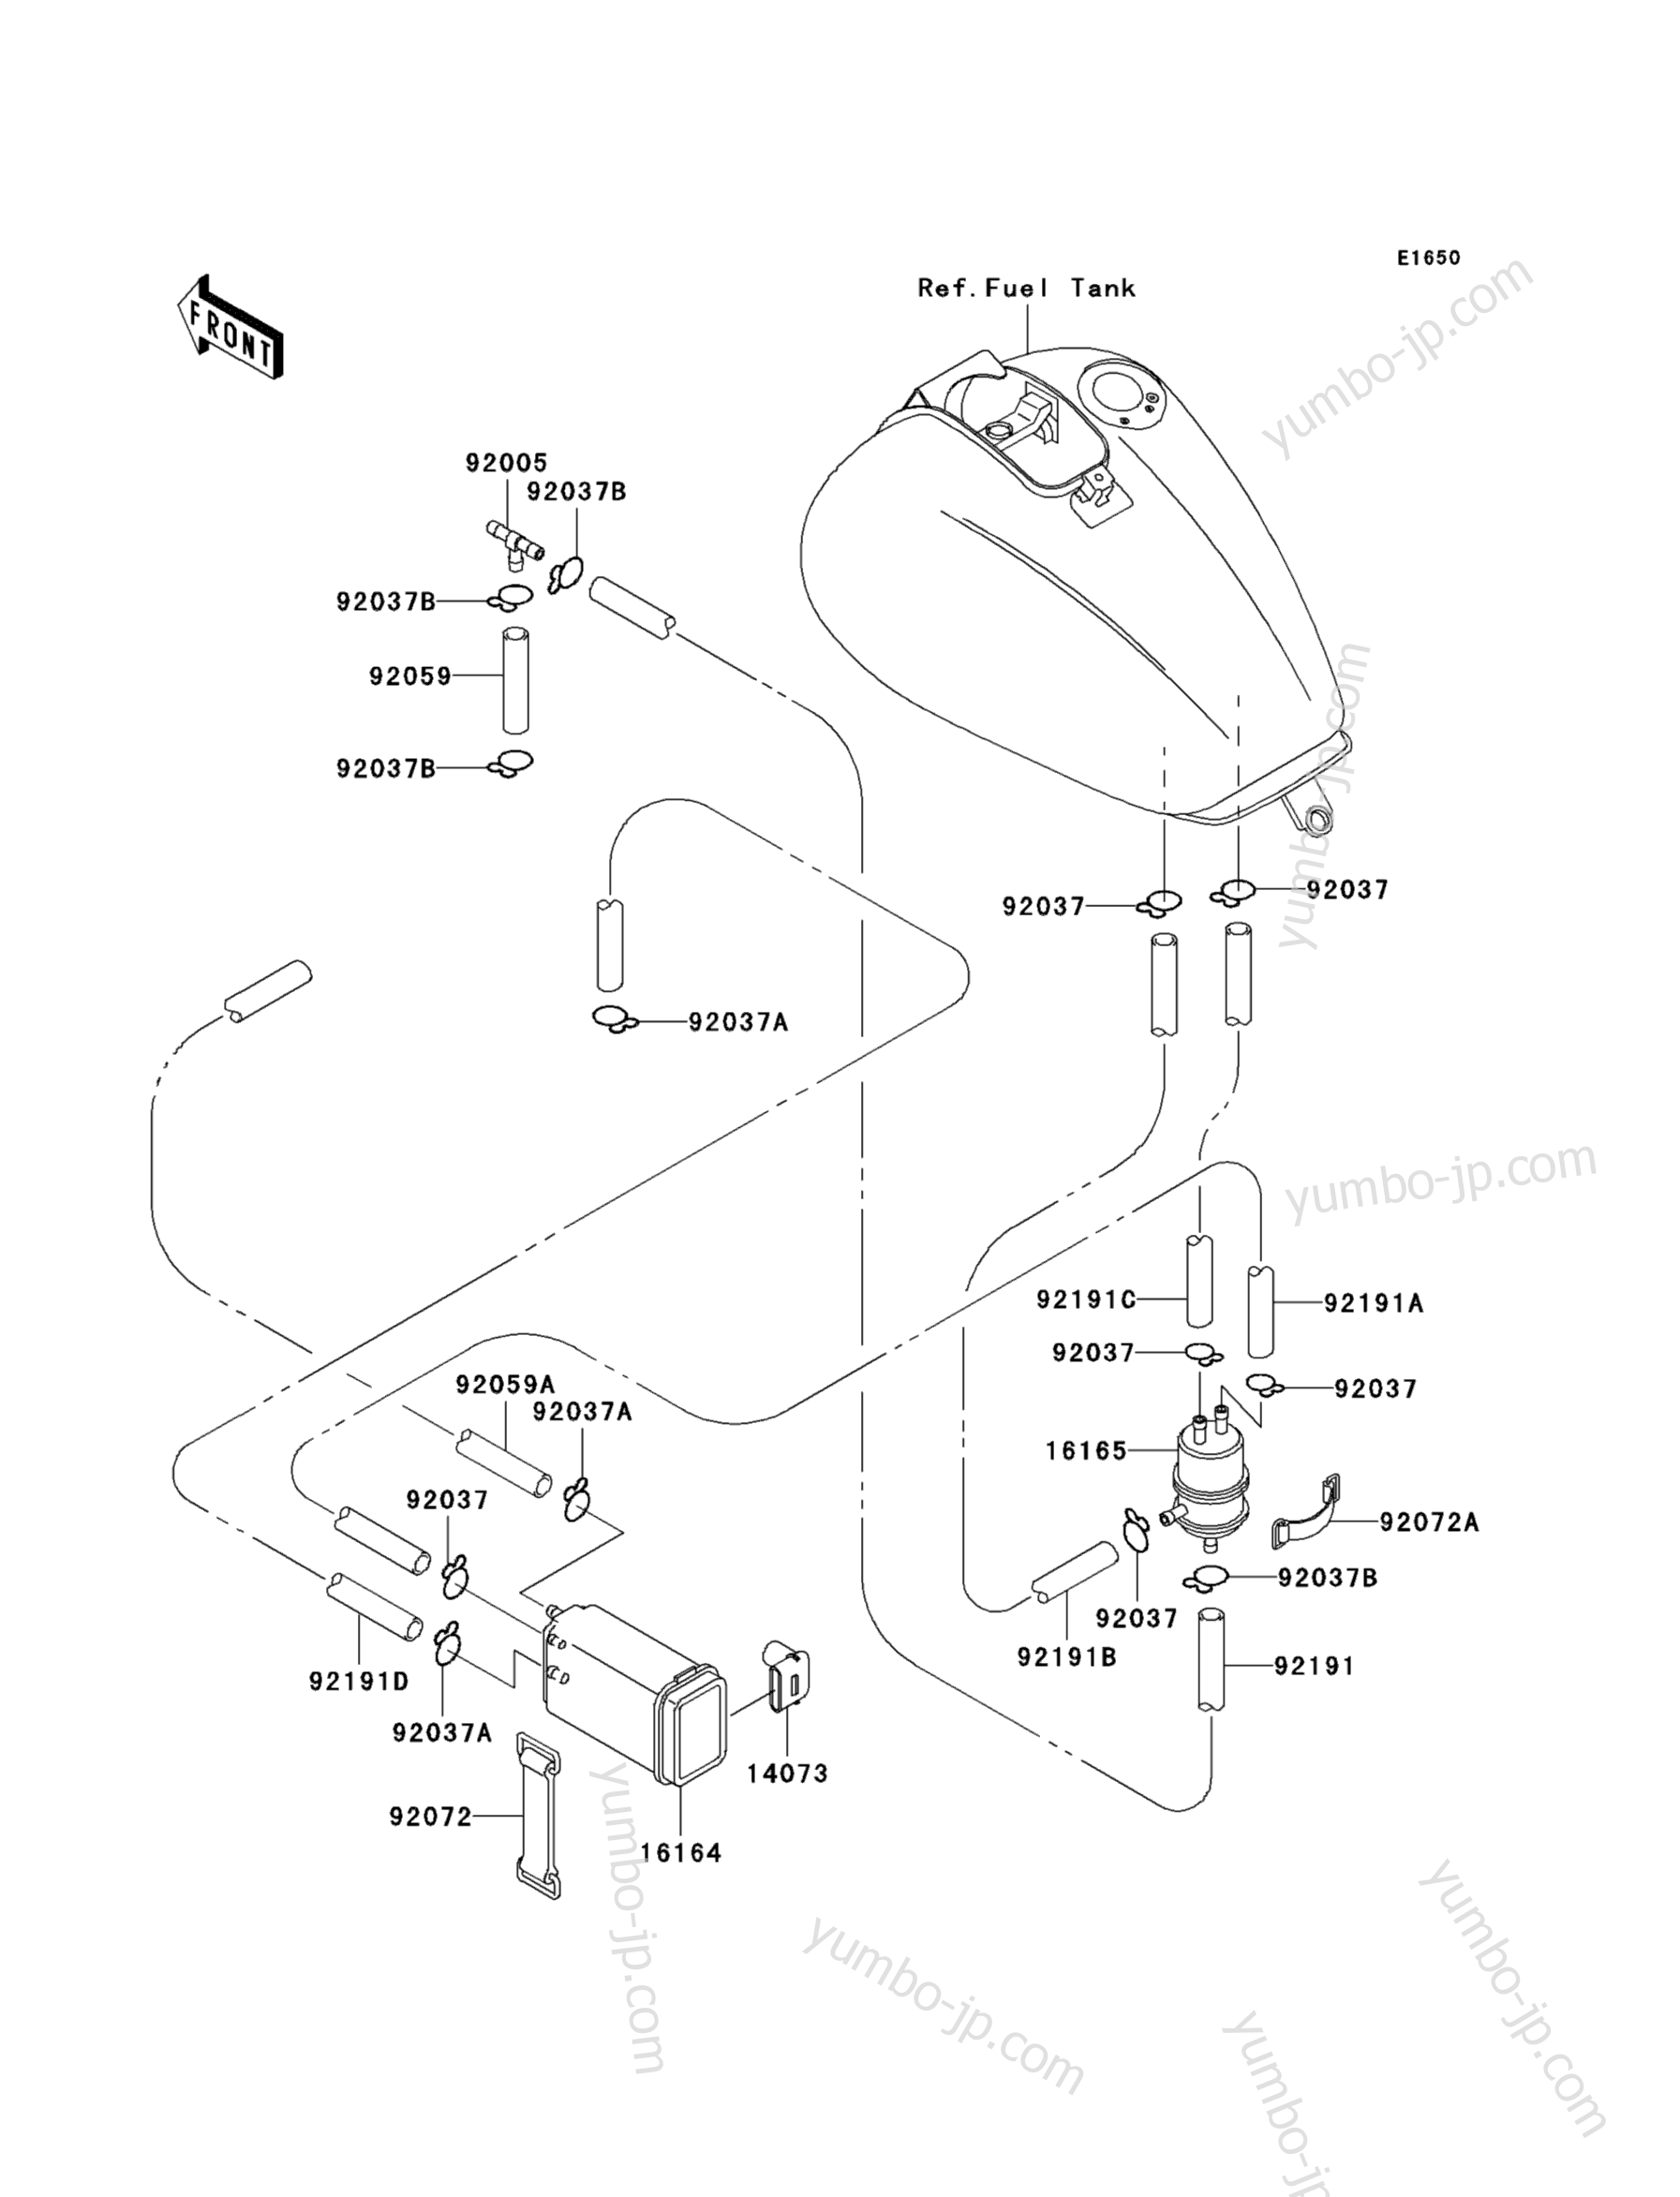 Fuel Evaporative System(CA) for motorcycles KAWASAKI VULCAN 1500 CLASSIC (VN1500-E6) 2003 year